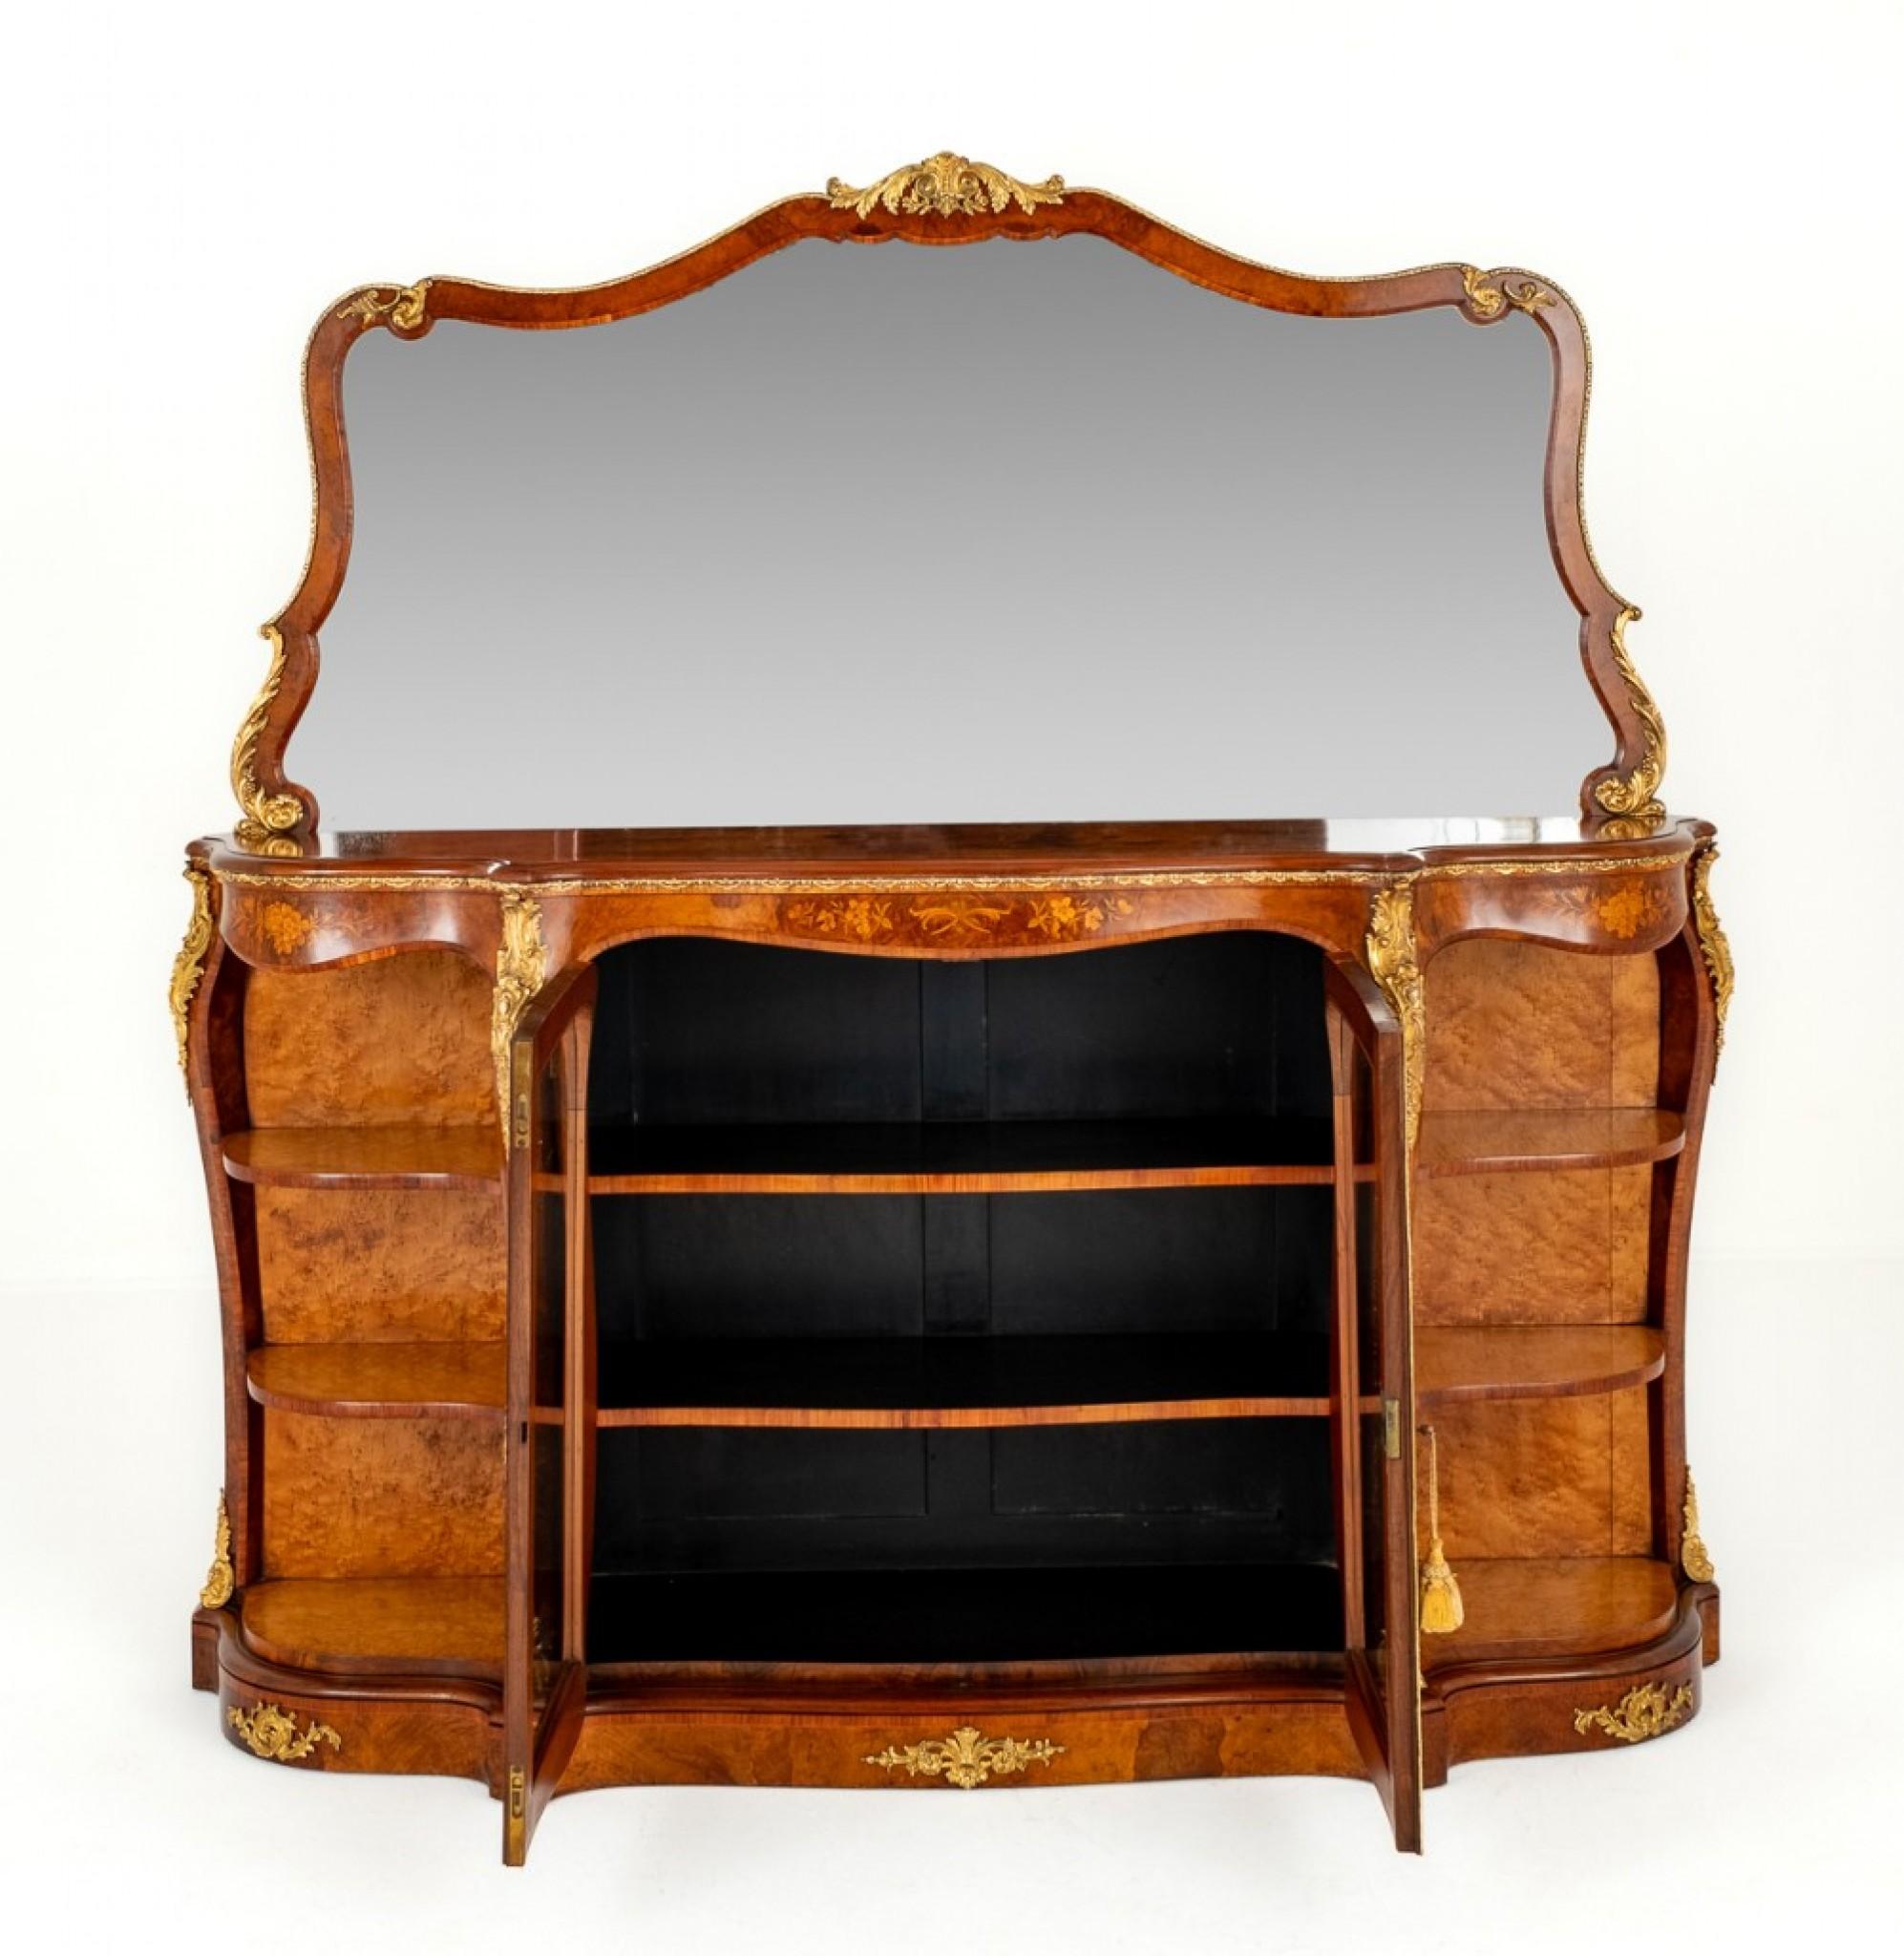 Wonderful Victorian Burr Walnut Mirrored Back Credenza.
Circa 1860
Here we Have a Superb Quality Credenza Standing upon a Plinth Base.
Featuring 2 Central Glazed Doors with Shelves within.
Circa 1860
The Shaped End Sections Being of an Open Form